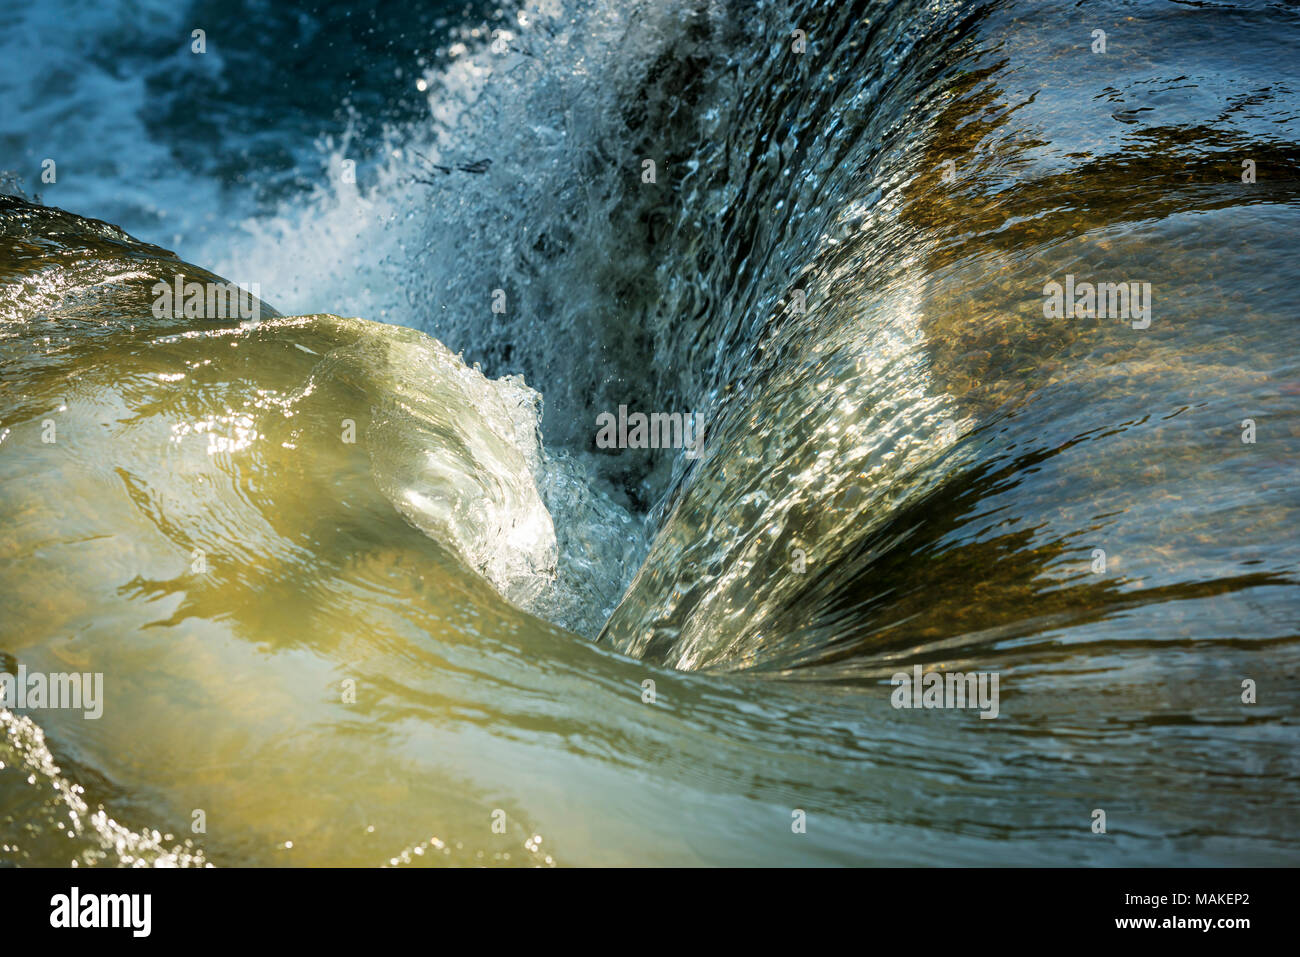 Natural waterfall whirlpool as tranquil background Stock Photo